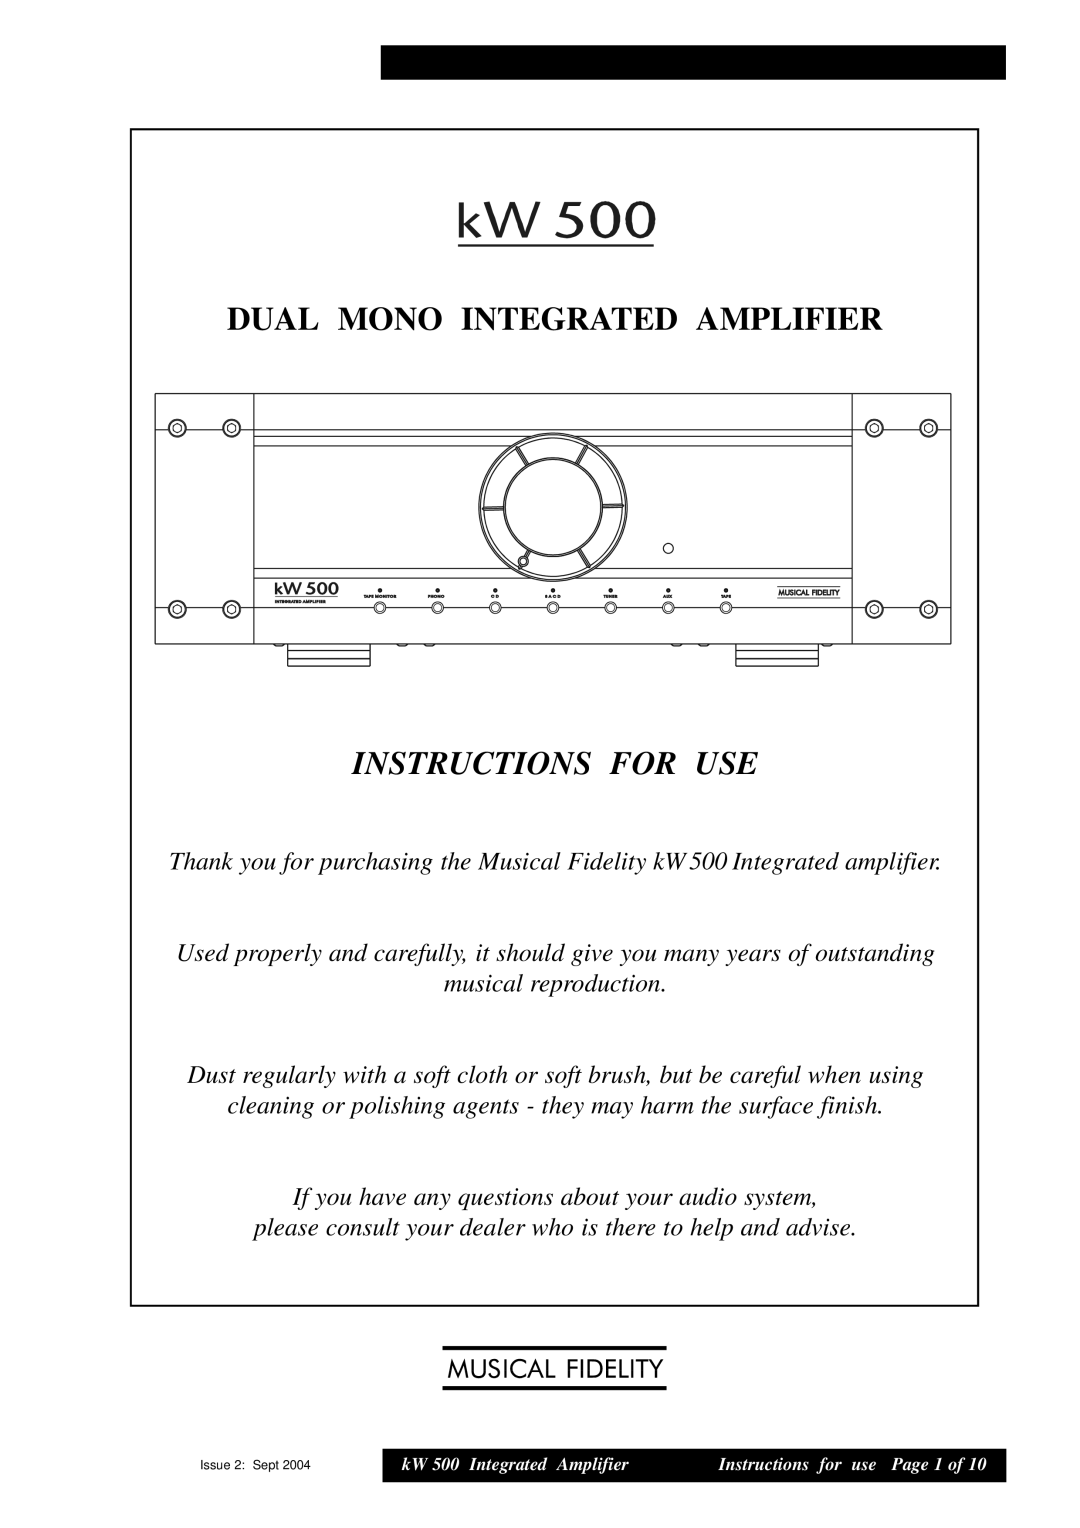 Musical Fidelity KW 500 manual Instructions For Use, Dual Mono Integrated Amplifier 